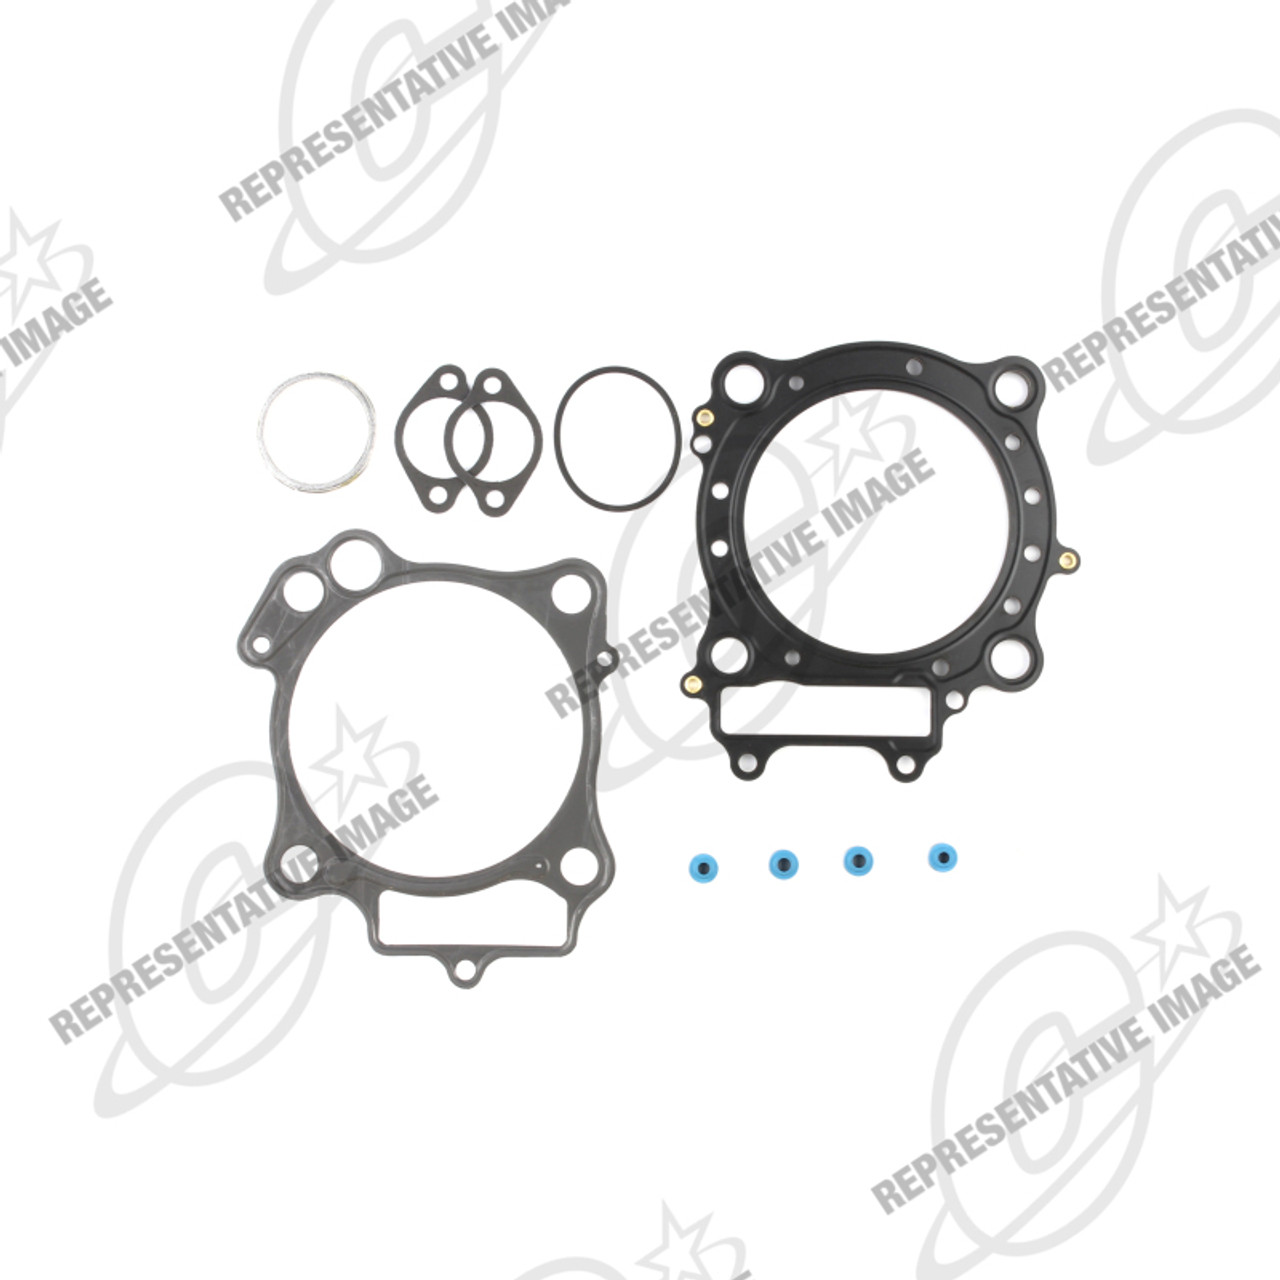 Cometic 02-04 Yamaha SX Viper 70mm Bore Top End Gasket Kit - C4036 Photo - Primary